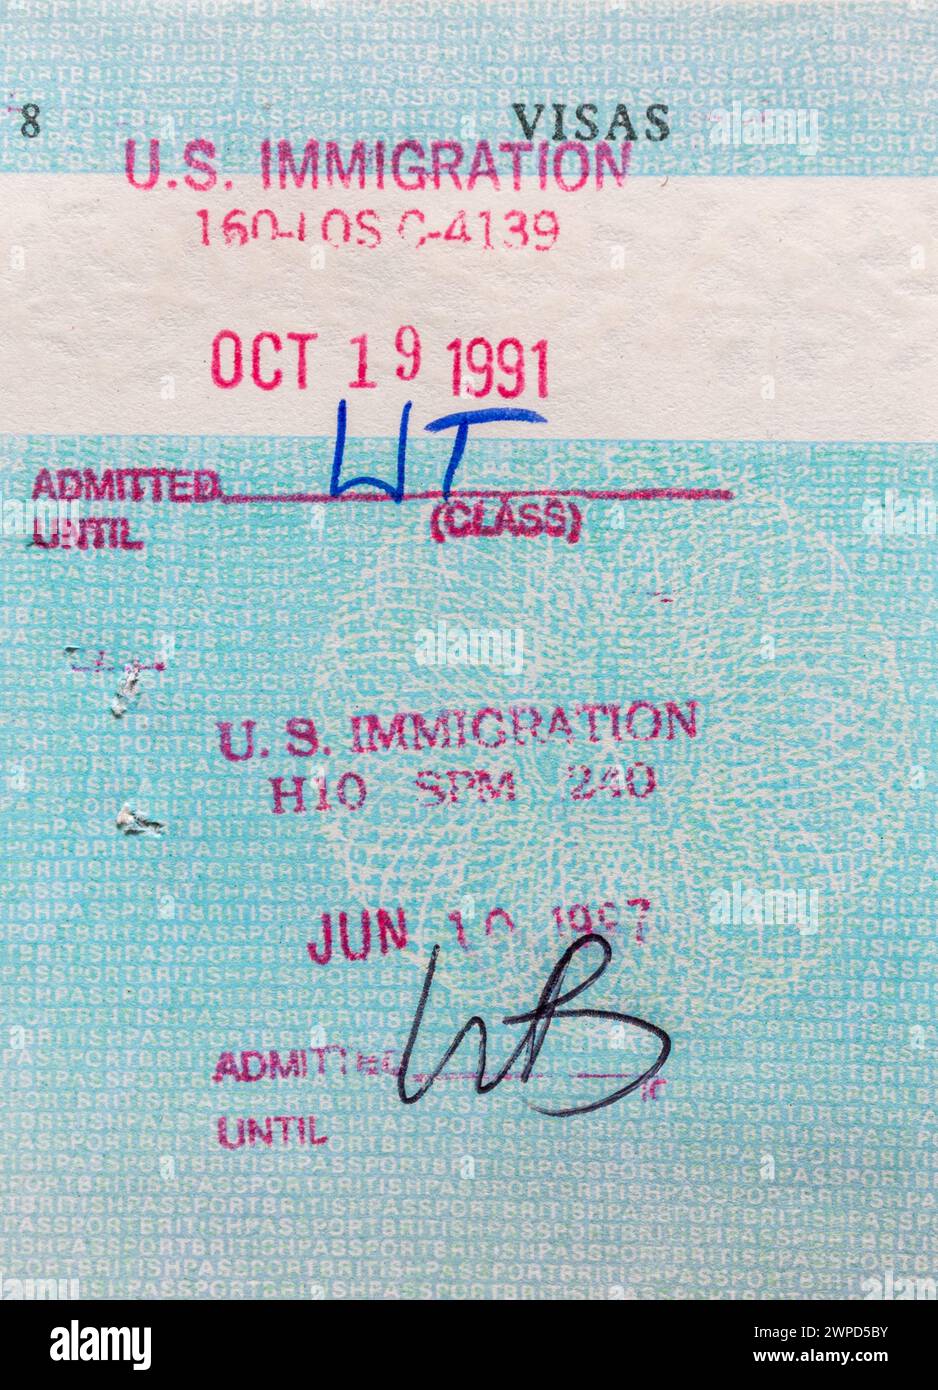 US Immigration stamps in British passport on entering the USA Stock Photo